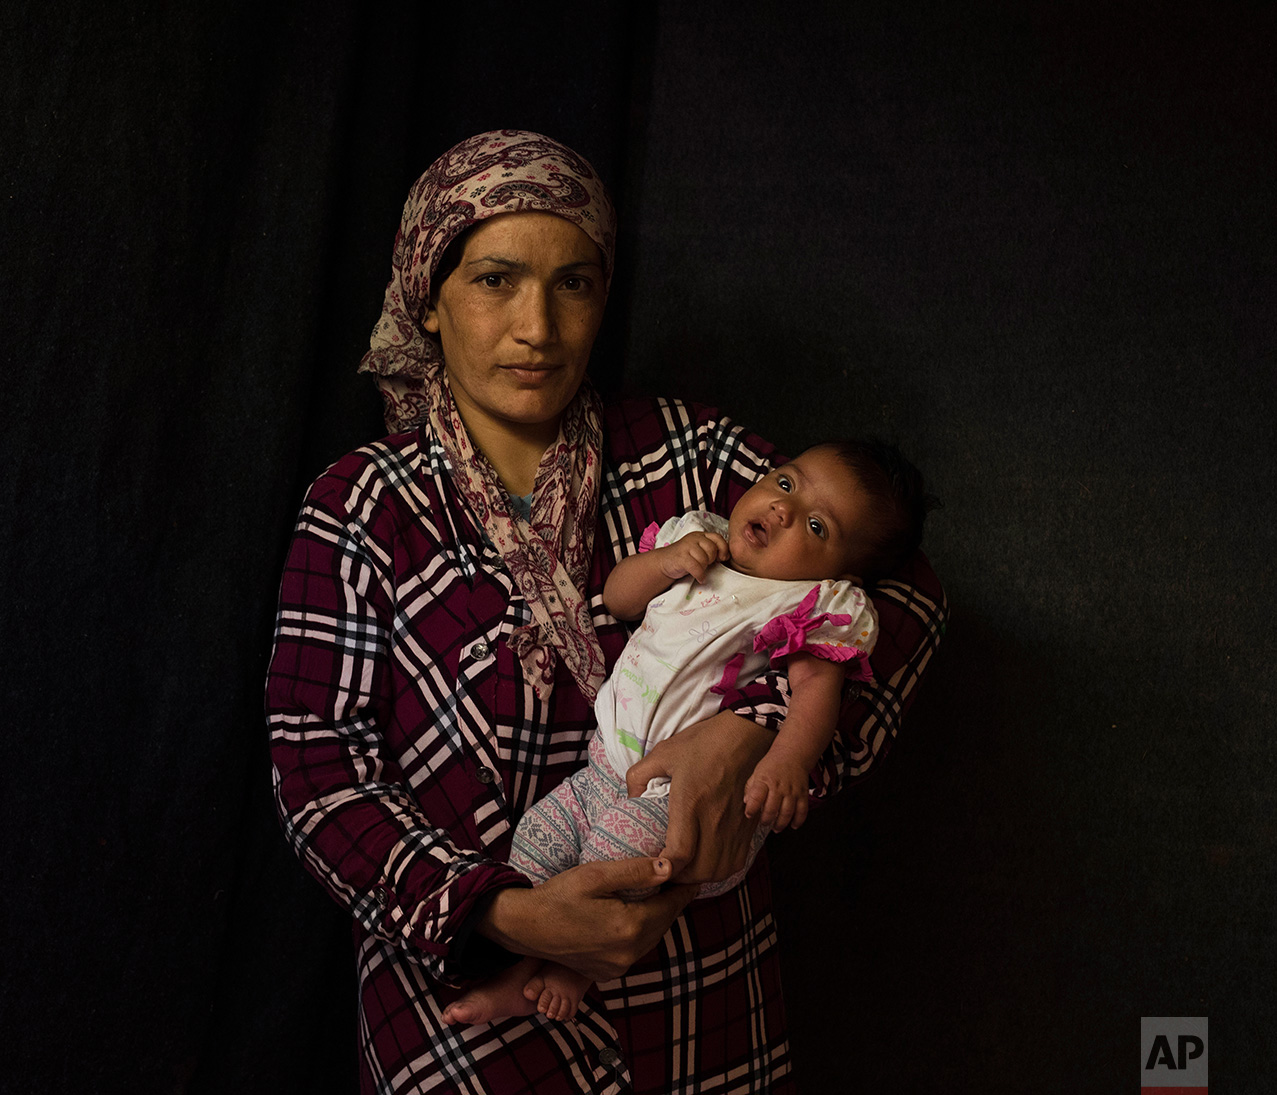  In this Tuesday Sept. 13, 2016 photo 33-year-old Kaouser Tamo, a Syrian mother from Al Hasakah, poses with her baby girl Shidra Abdul Gani Ahmed in a tent made of blankets given by the UNCHR at the Ritsona refugee camp in Greece. Kaouser is one of t